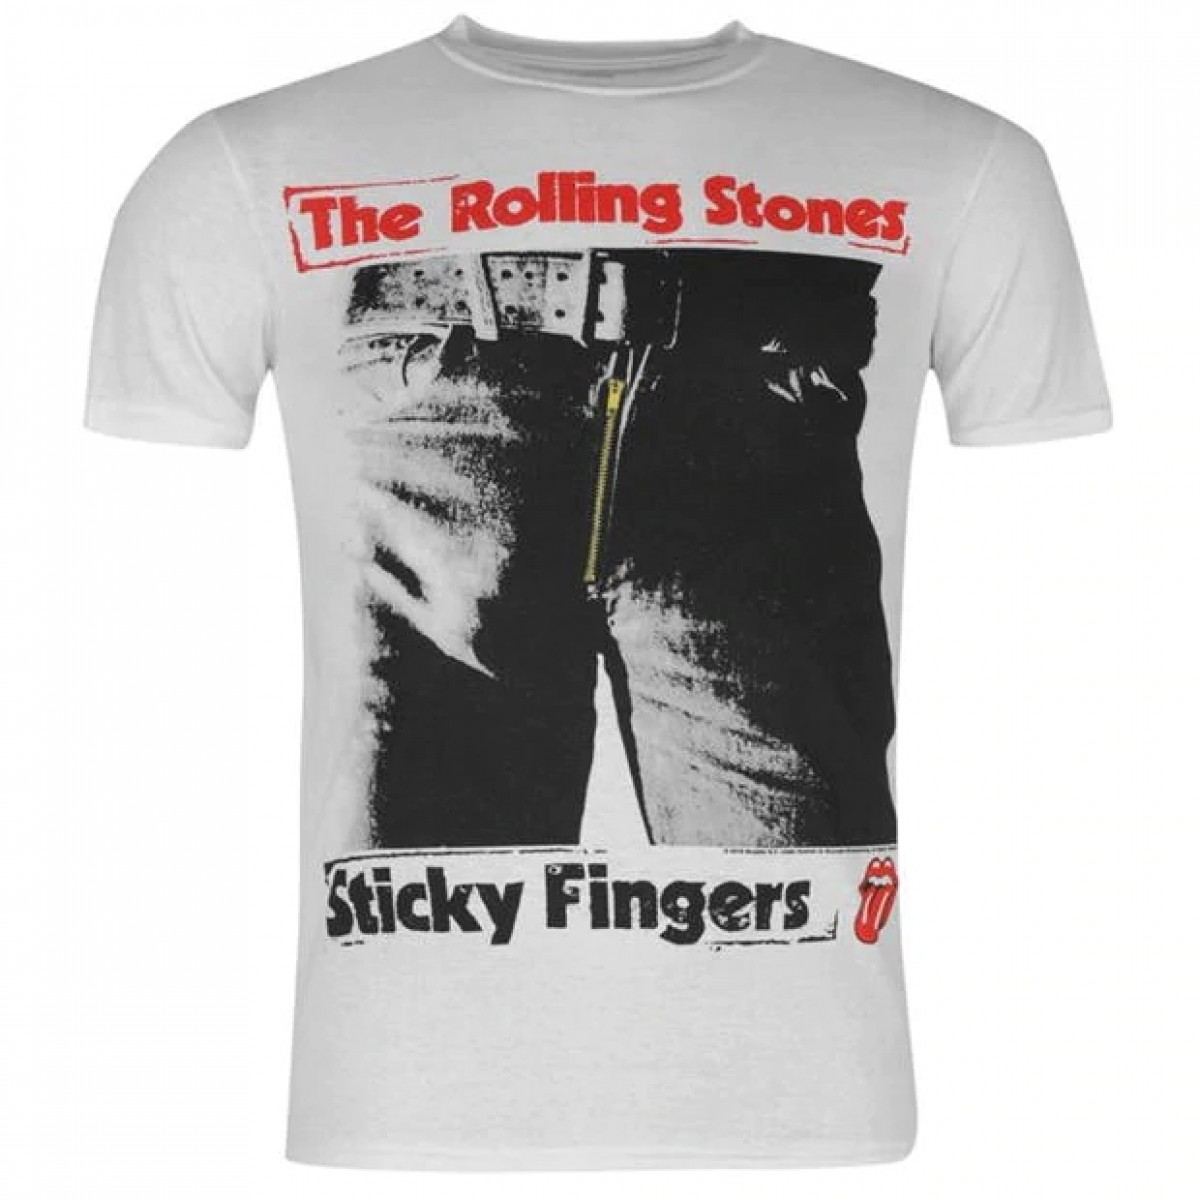 

Футболка Official Rolling Stones Sticky Fingers,  (44, Футболка Official Rolling Stones Sticky Fingers, S (44)